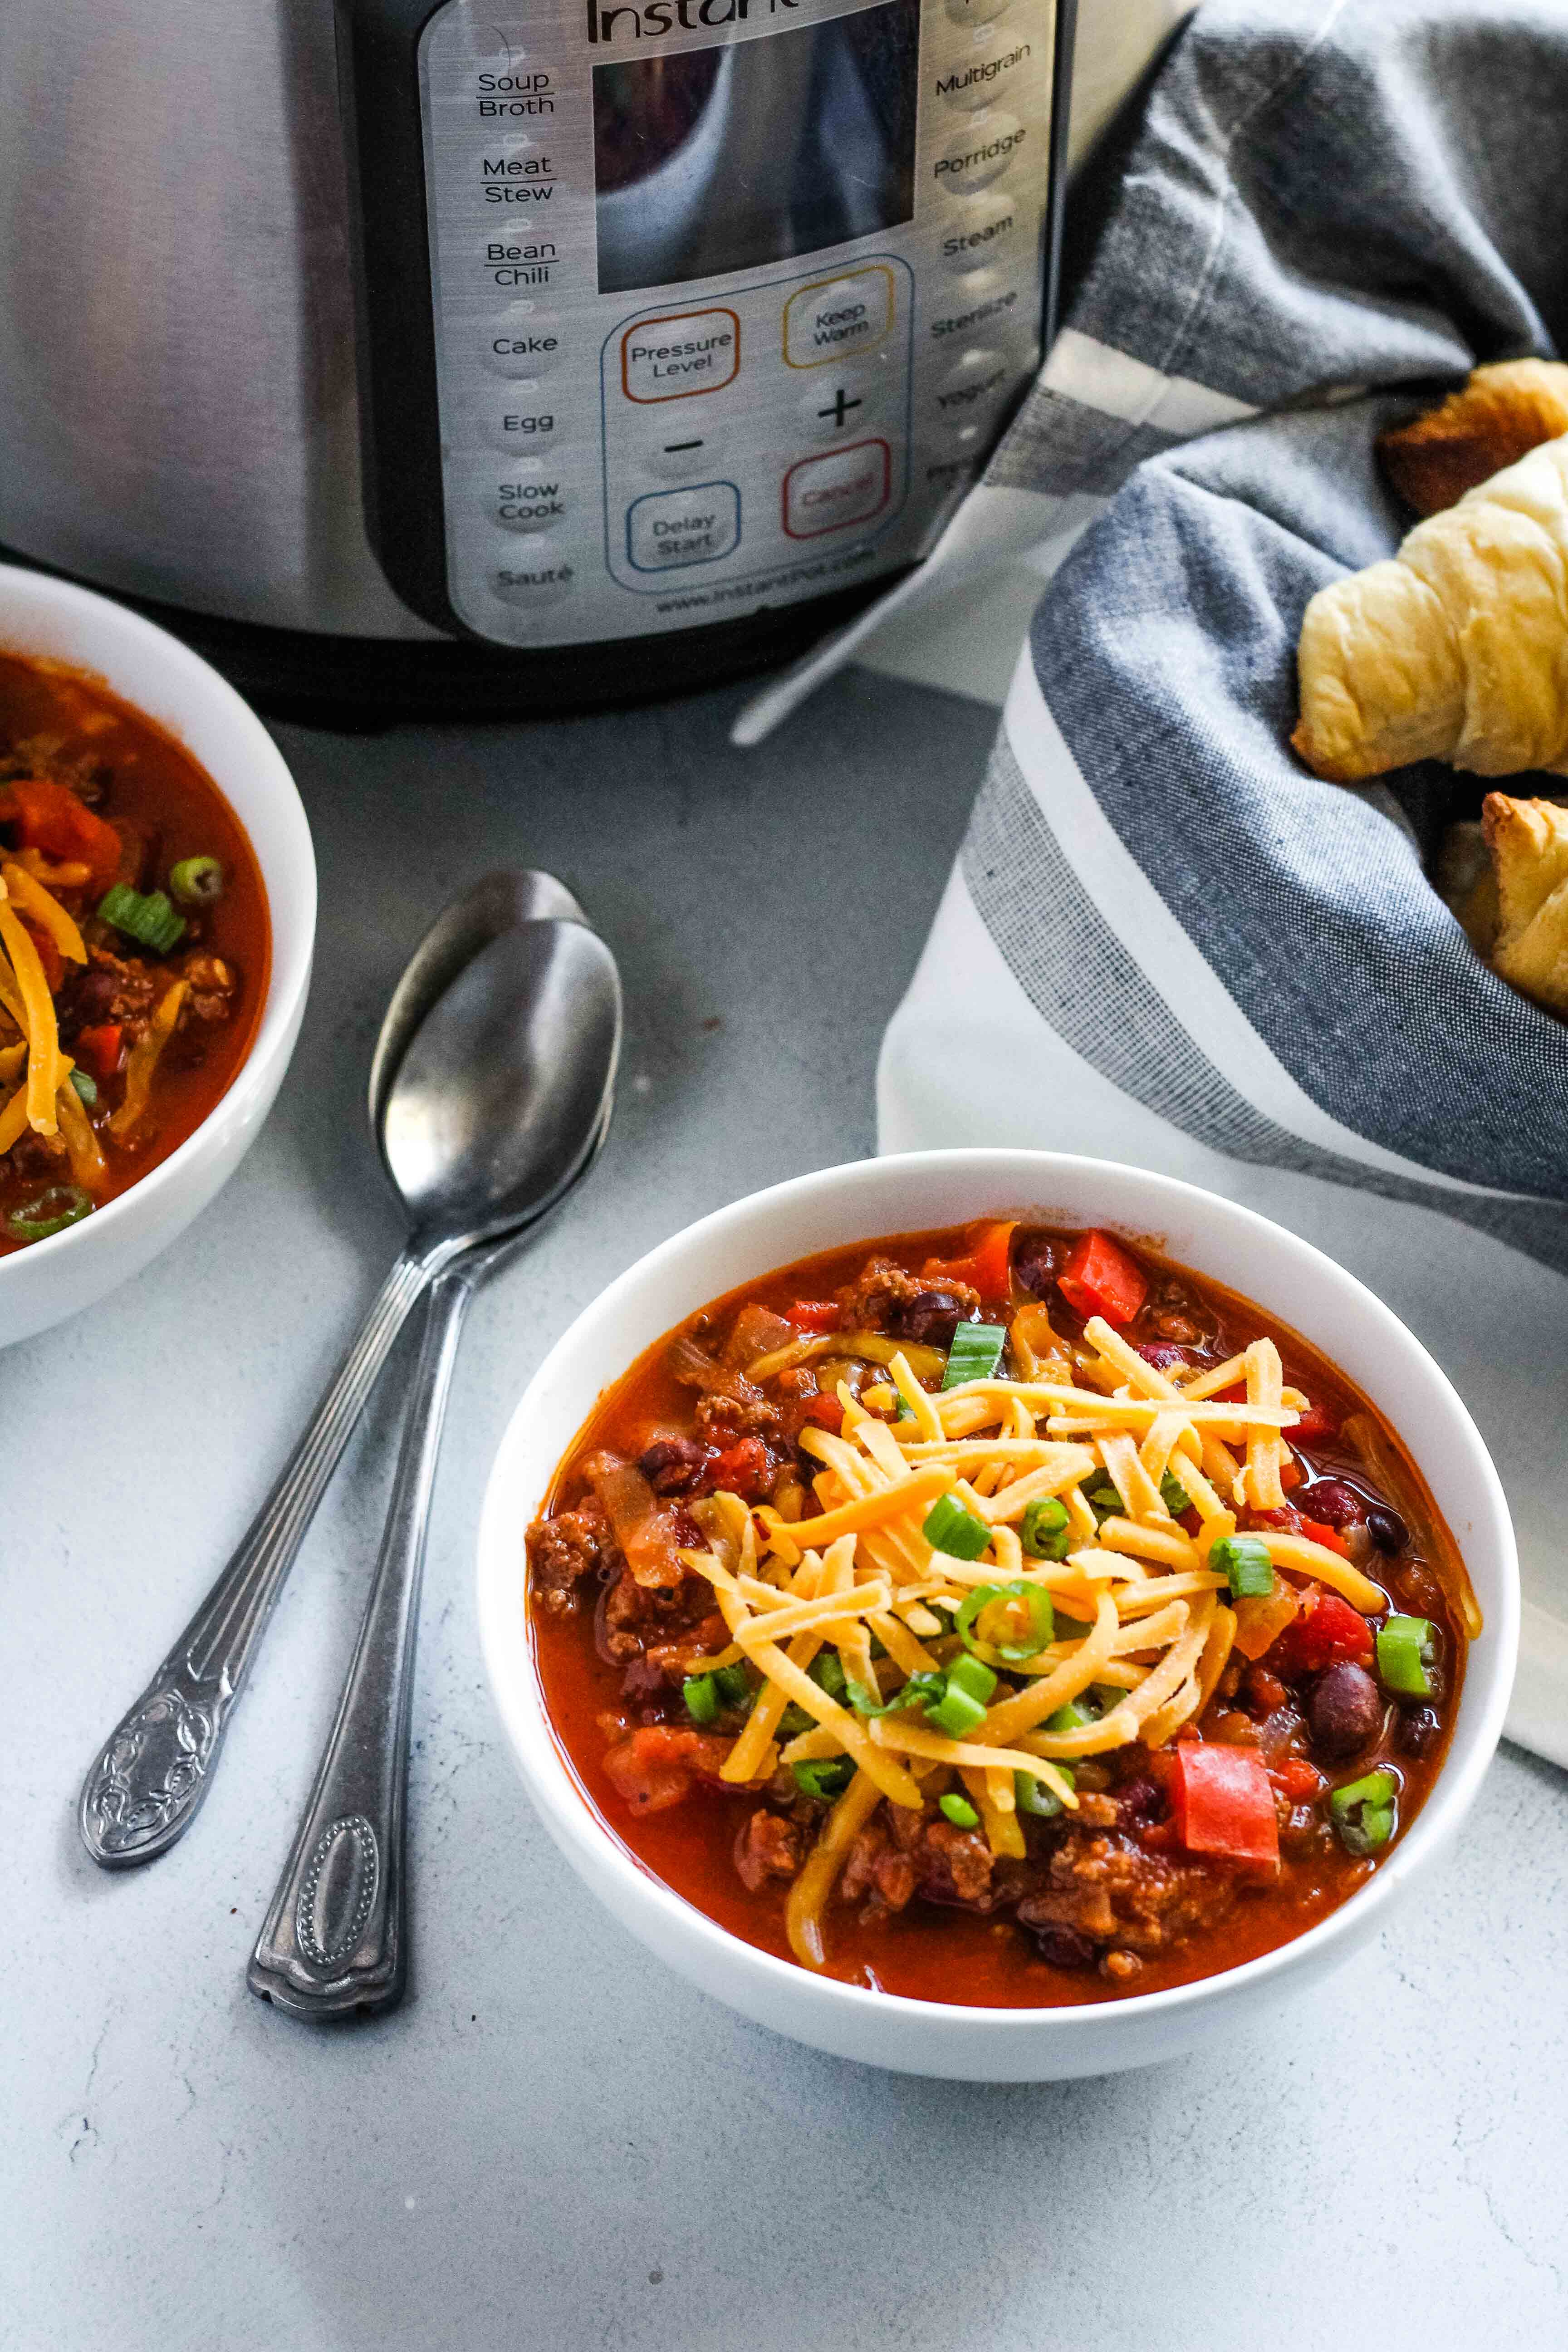 Make this easy Classic Instant Pot Chili recipe. Learn how easy it is to make chili in an instant pot with pantry ingredients you already have | Street Smart Nutrition